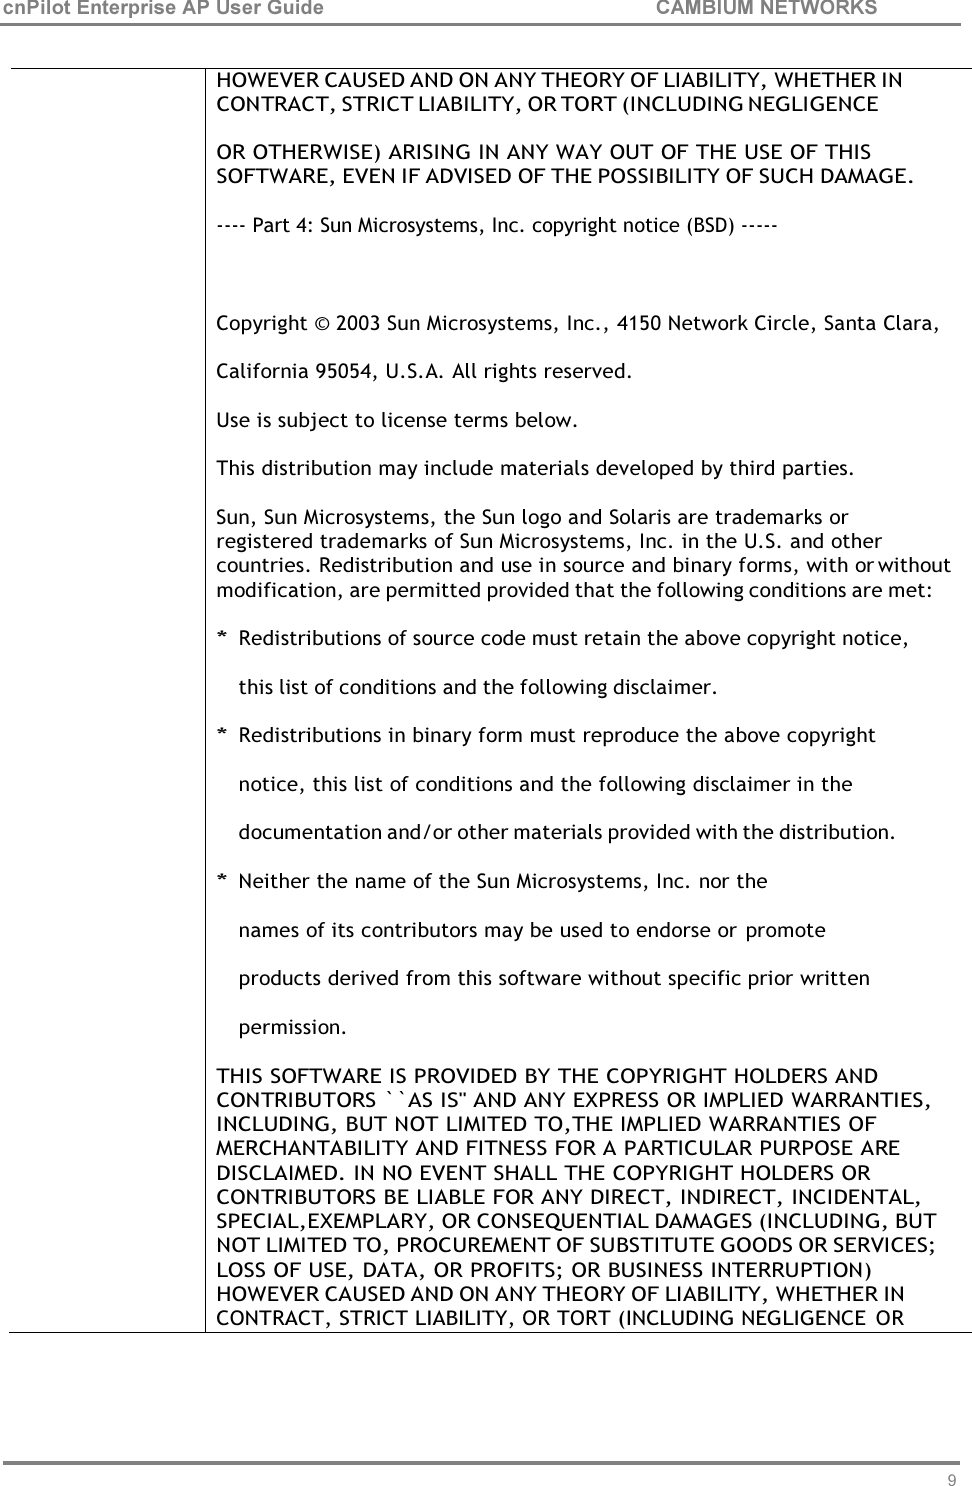 93 cnPilot Enterprise AP User Guide CAMBIUM NETWORKS      HOWEVER CAUSED AND ON ANY THEORY OF LIABILITY, WHETHER IN CONTRACT, STRICT LIABILITY, OR TORT (INCLUDING NEGLIGENCE  OR OTHERWISE) ARISING IN ANY WAY OUT OF THE USE OF THIS SOFTWARE, EVEN IF ADVISED OF THE POSSIBILITY OF SUCH DAMAGE.  ---- Part 4: Sun Microsystems, Inc. copyright notice (BSD) -----   Copyright © 2003 Sun Microsystems, Inc., 4150 Network Circle, Santa Clara, California 95054, U.S.A. All rights reserved. Use is subject to license terms below.  This distribution may include materials developed by third parties.  Sun, Sun Microsystems, the Sun logo and Solaris are trademarks or  registered trademarks of Sun Microsystems, Inc. in the U.S. and other countries. Redistribution and use in source and binary forms, with or without modification, are permitted provided that the following conditions are met:  * Redistributions of source code must retain the above copyright notice, this list of conditions and the following disclaimer. * Redistributions in binary form must reproduce the above copyright notice, this list of conditions and the following disclaimer in the documentation and/or other materials provided with the distribution. * Neither the name of the Sun Microsystems, Inc. nor the names of its contributors may be used to endorse or promote products derived from this software without specific prior written permission. THIS SOFTWARE IS PROVIDED BY THE COPYRIGHT HOLDERS AND CONTRIBUTORS ``AS IS&apos;&apos; AND ANY EXPRESS OR IMPLIED WARRANTIES, INCLUDING, BUT NOT LIMITED TO,THE IMPLIED WARRANTIES OF MERCHANTABILITY AND FITNESS FOR A PARTICULAR PURPOSE ARE DISCLAIMED. IN NO EVENT SHALL THE COPYRIGHT HOLDERS OR CONTRIBUTORS BE LIABLE FOR ANY DIRECT, INDIRECT, INCIDENTAL, SPECIAL,EXEMPLARY, OR CONSEQUENTIAL DAMAGES (INCLUDING, BUT NOT LIMITED TO, PROCUREMENT OF SUBSTITUTE GOODS OR SERVICES; LOSS OF USE, DATA, OR PROFITS; OR BUSINESS INTERRUPTION) HOWEVER CAUSED AND ON ANY THEORY OF LIABILITY, WHETHER IN CONTRACT, STRICT LIABILITY, OR TORT (INCLUDING NEGLIGENCE  OR 